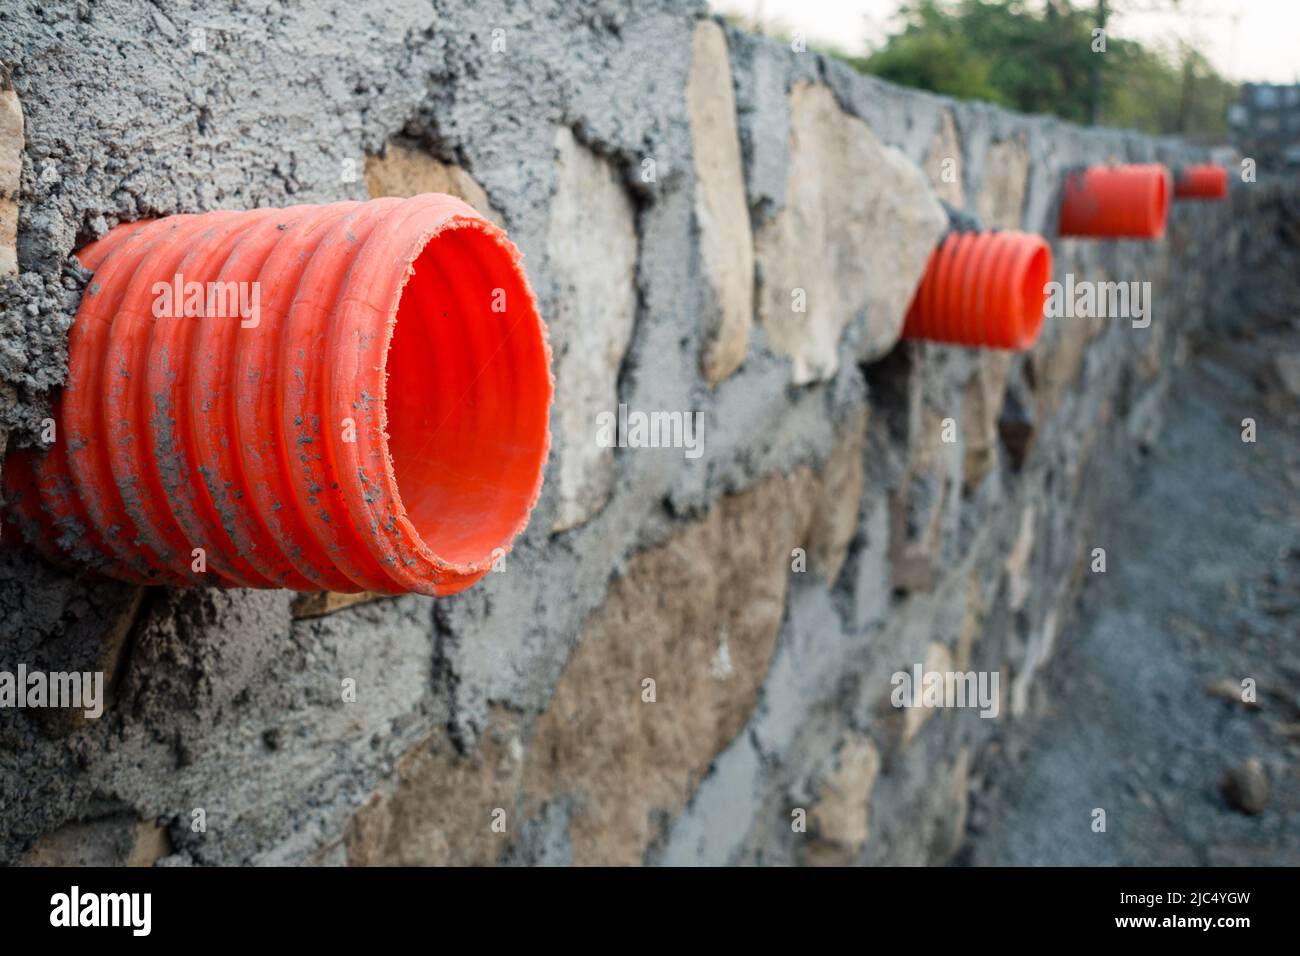 A row of orange culverts or water outlet pipes through a stone retaining wall for storm drainage in the hills of Uttarakhand India. Stock Photo